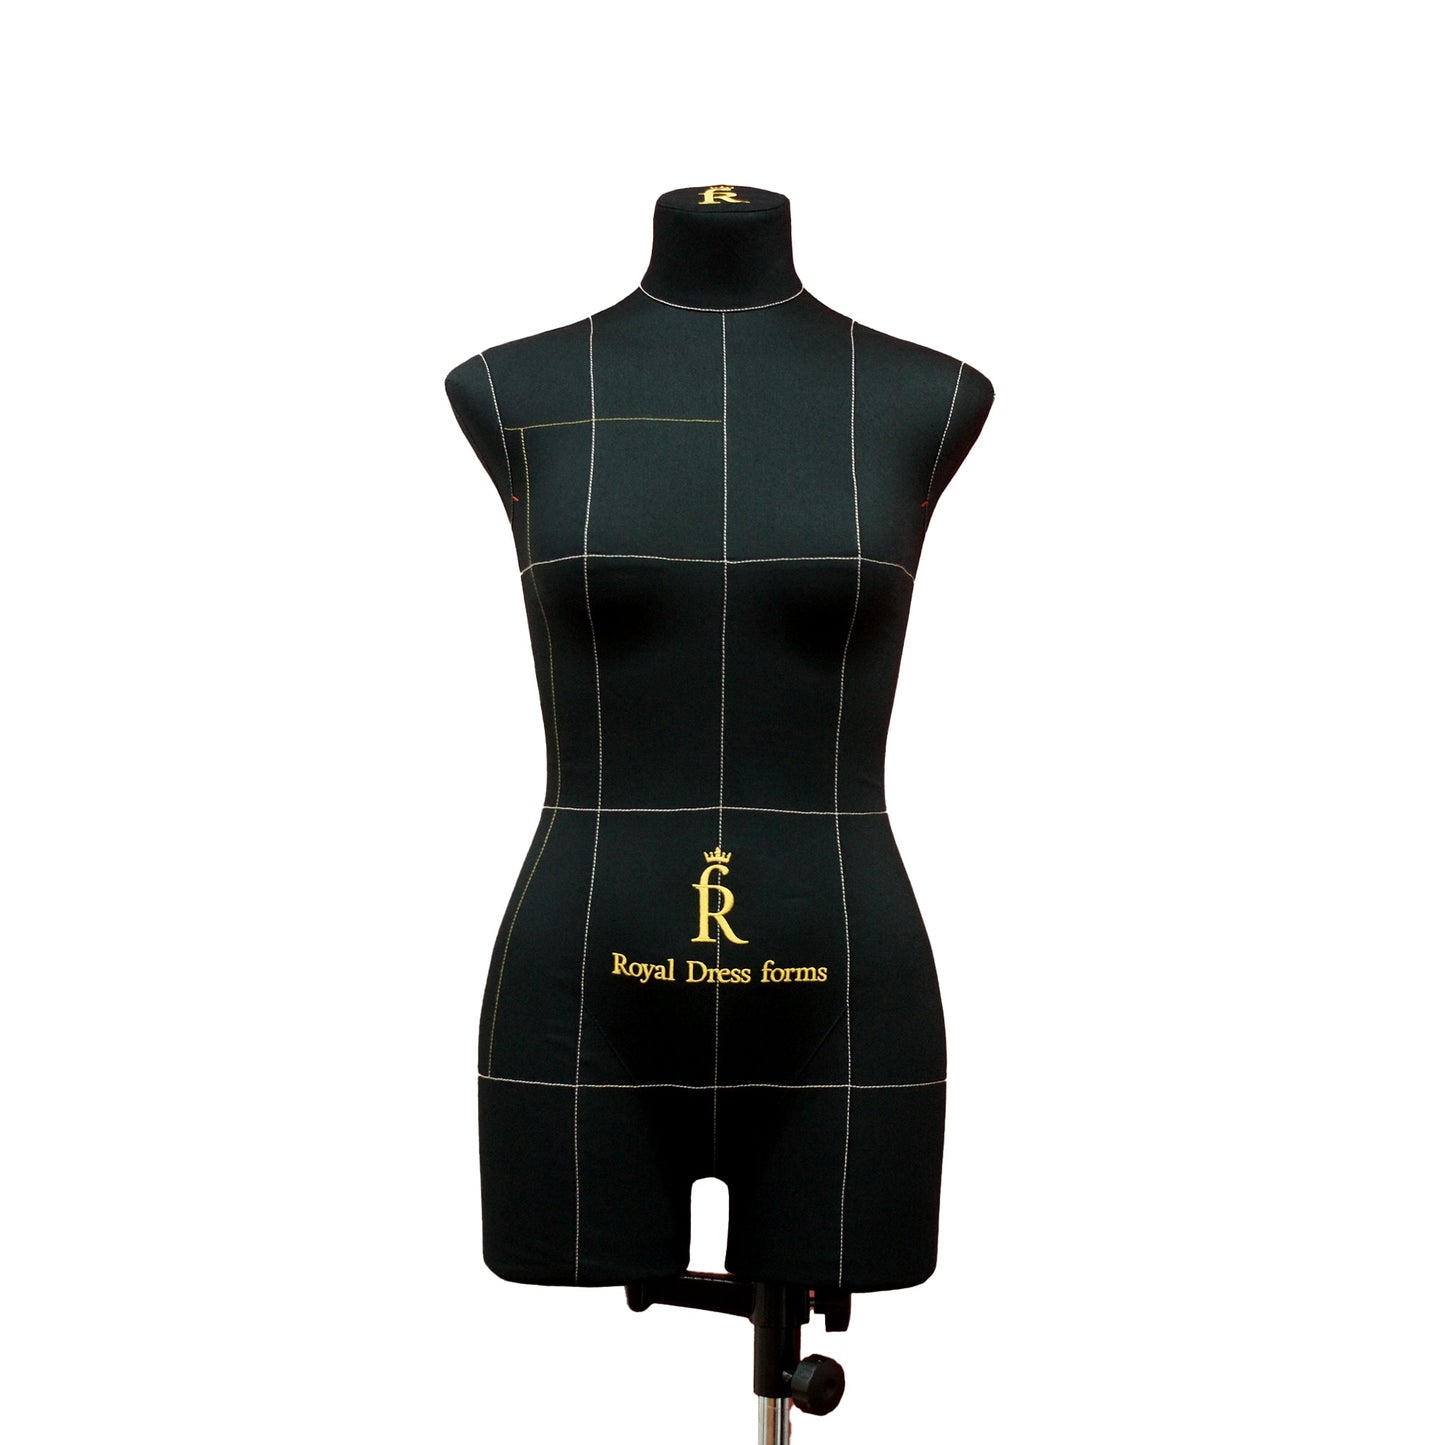 Monica | Royal Dress forms. Made of elastic polymer material. Resistant to iron and garment steamer. Compressibility. Unique handmade cotton cover with balance lines. The cover is water-repellent. Sizes: XXS - XXXL* (34 - 48 EU; 2 - 16 US). Anatomical body shape.